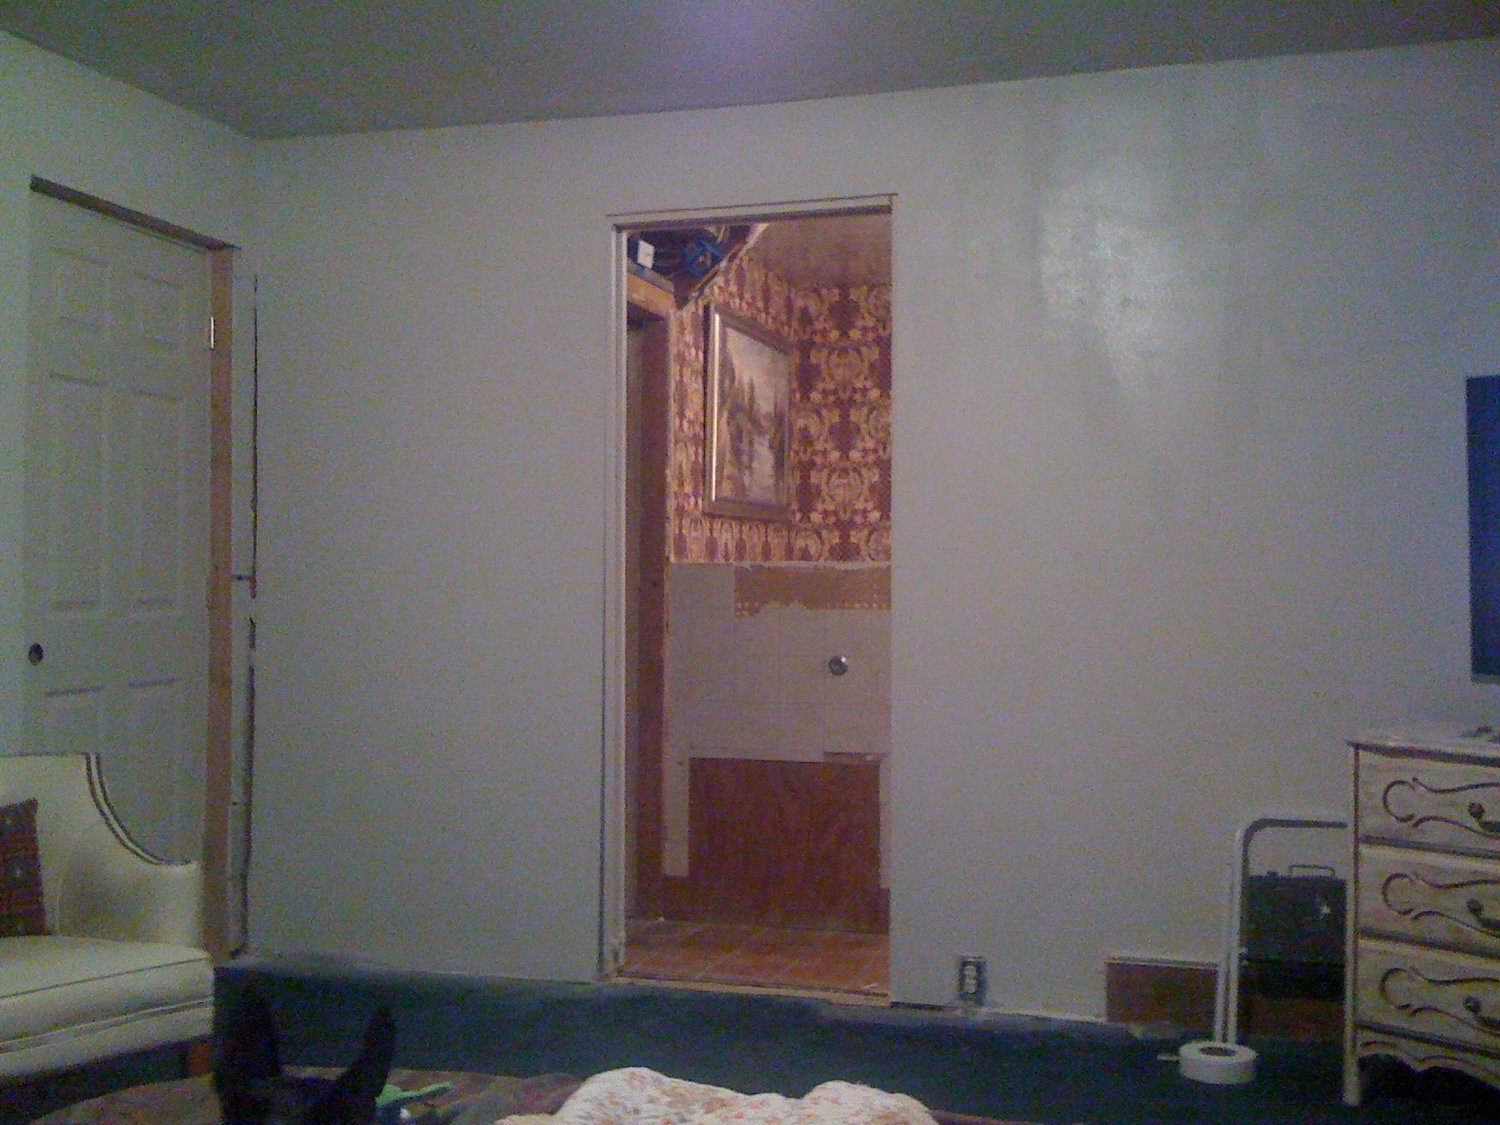 New pocket door entrance to master bath. This wall used to be closed off. New bedroom entry door to the left.